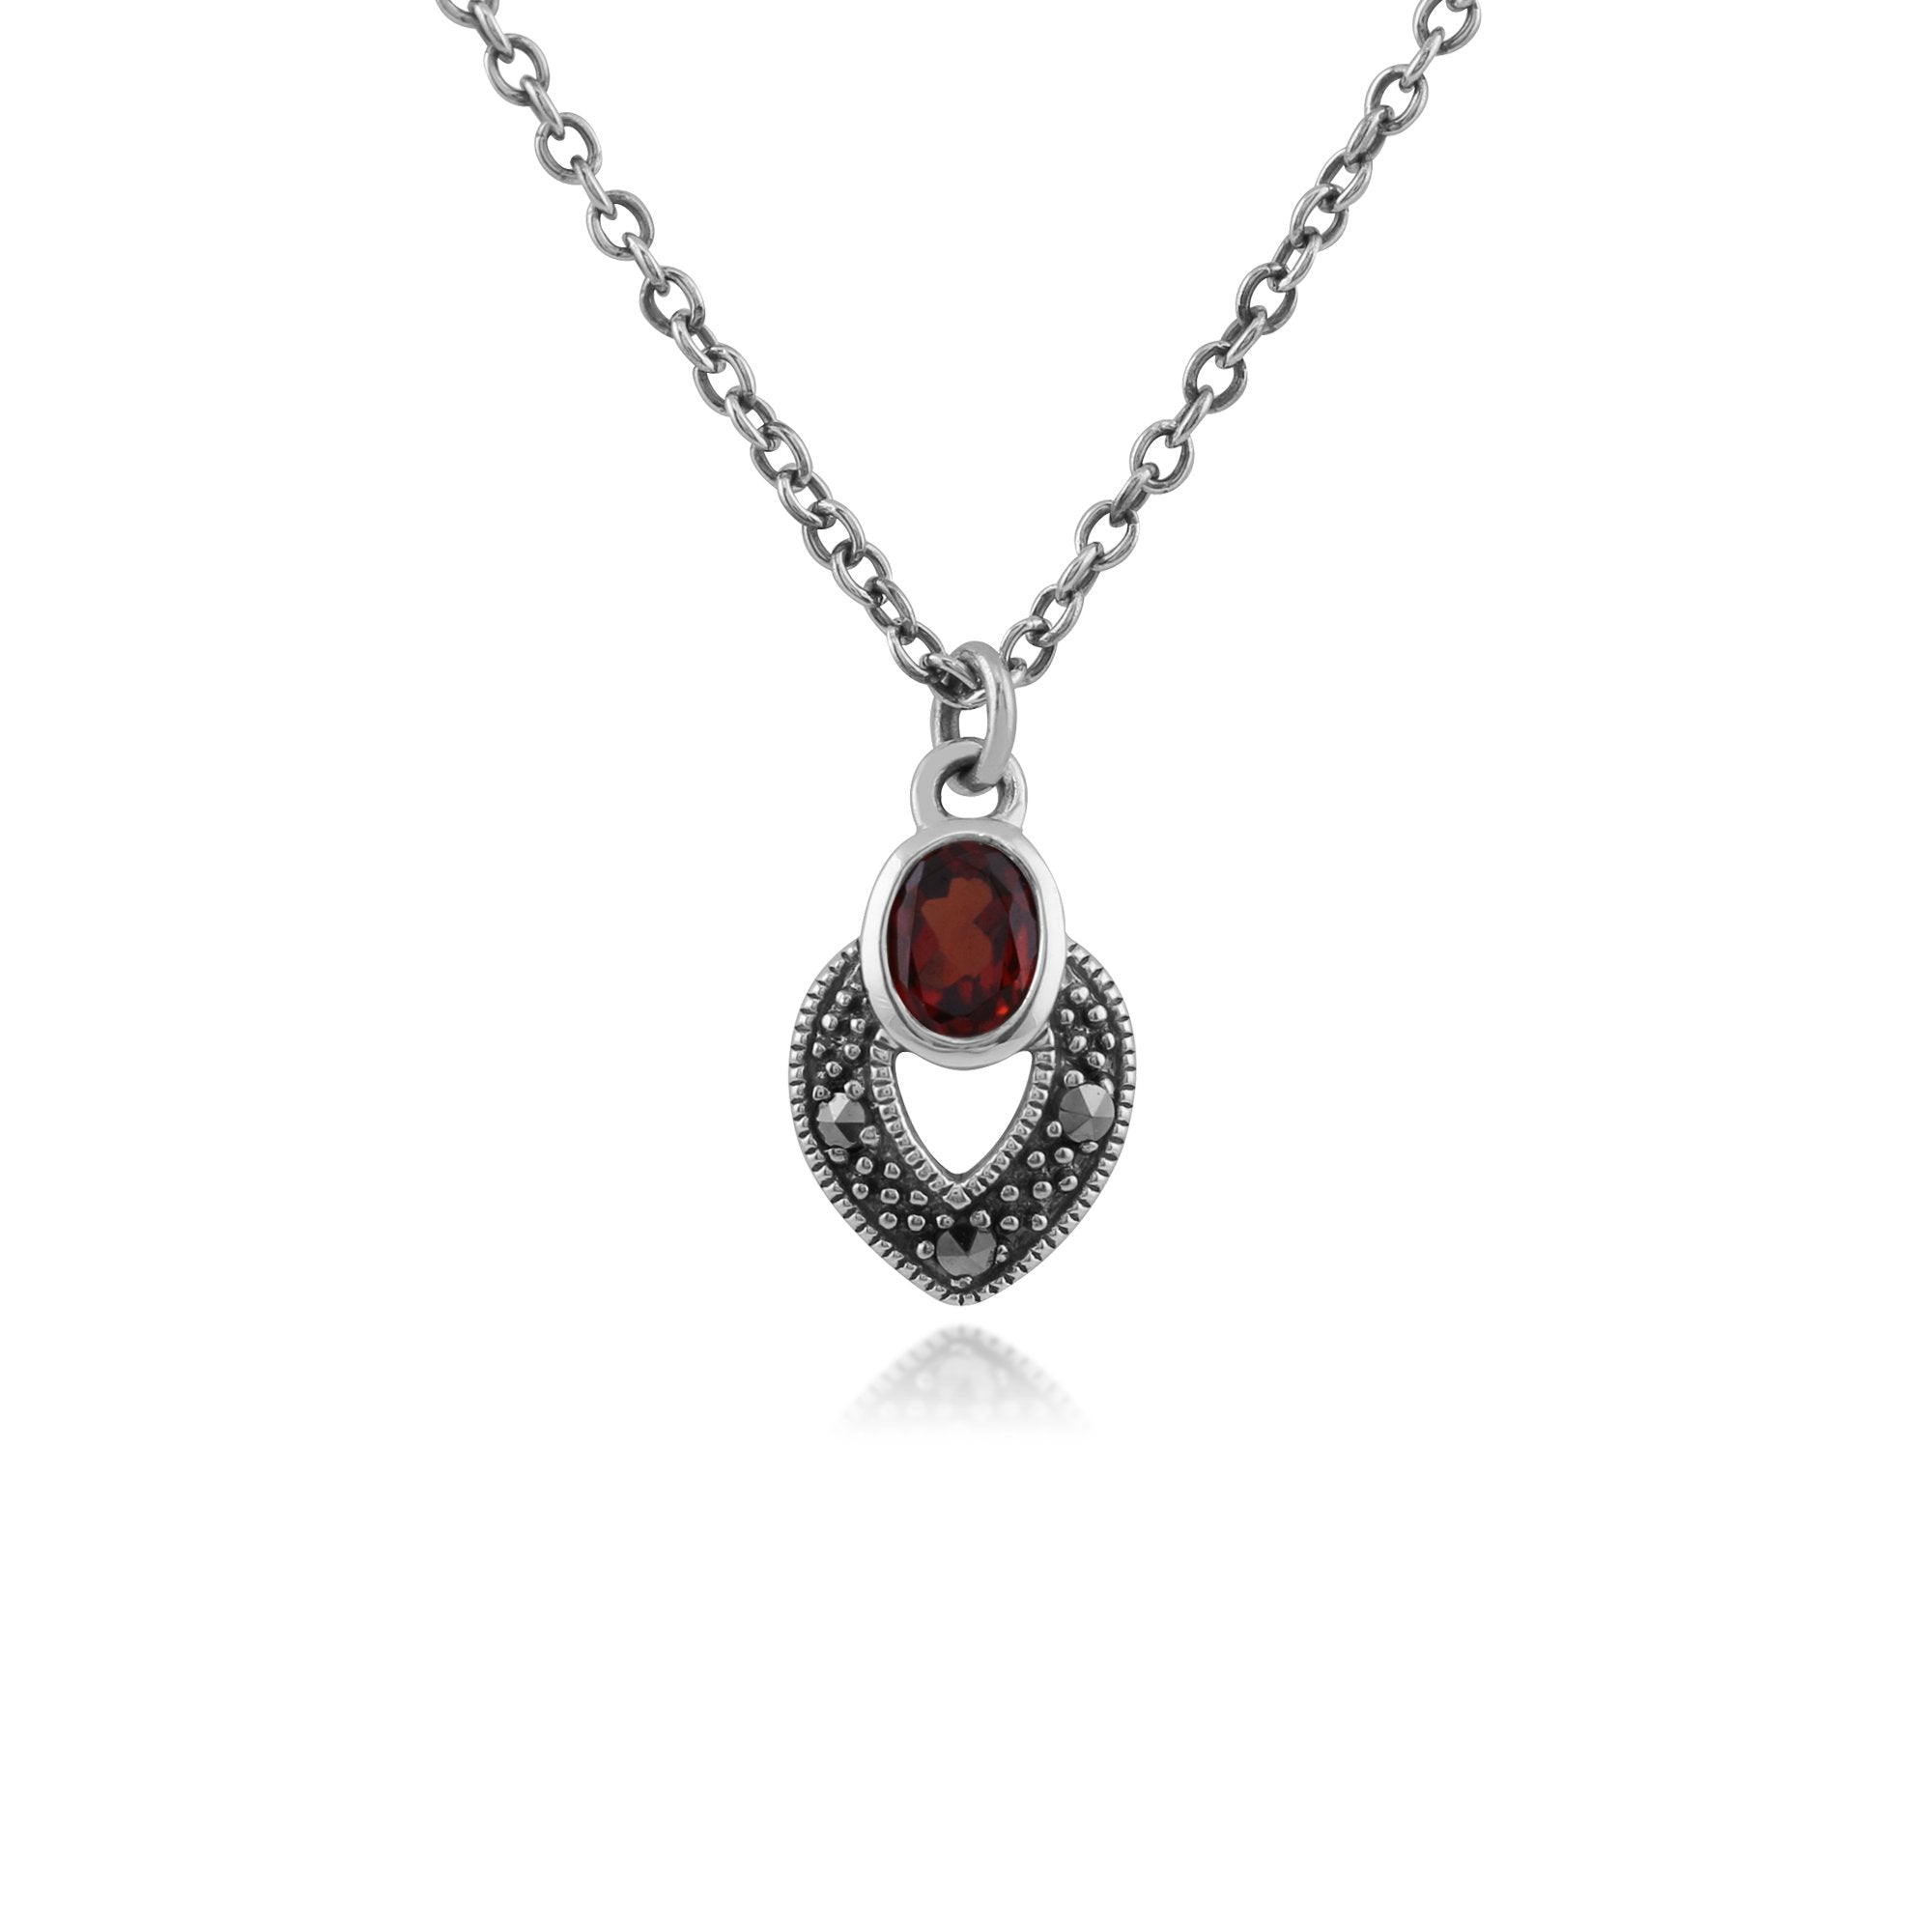 Art Deco Style Oval Garnet & Marcasite Necklace in 925 Sterling Silver